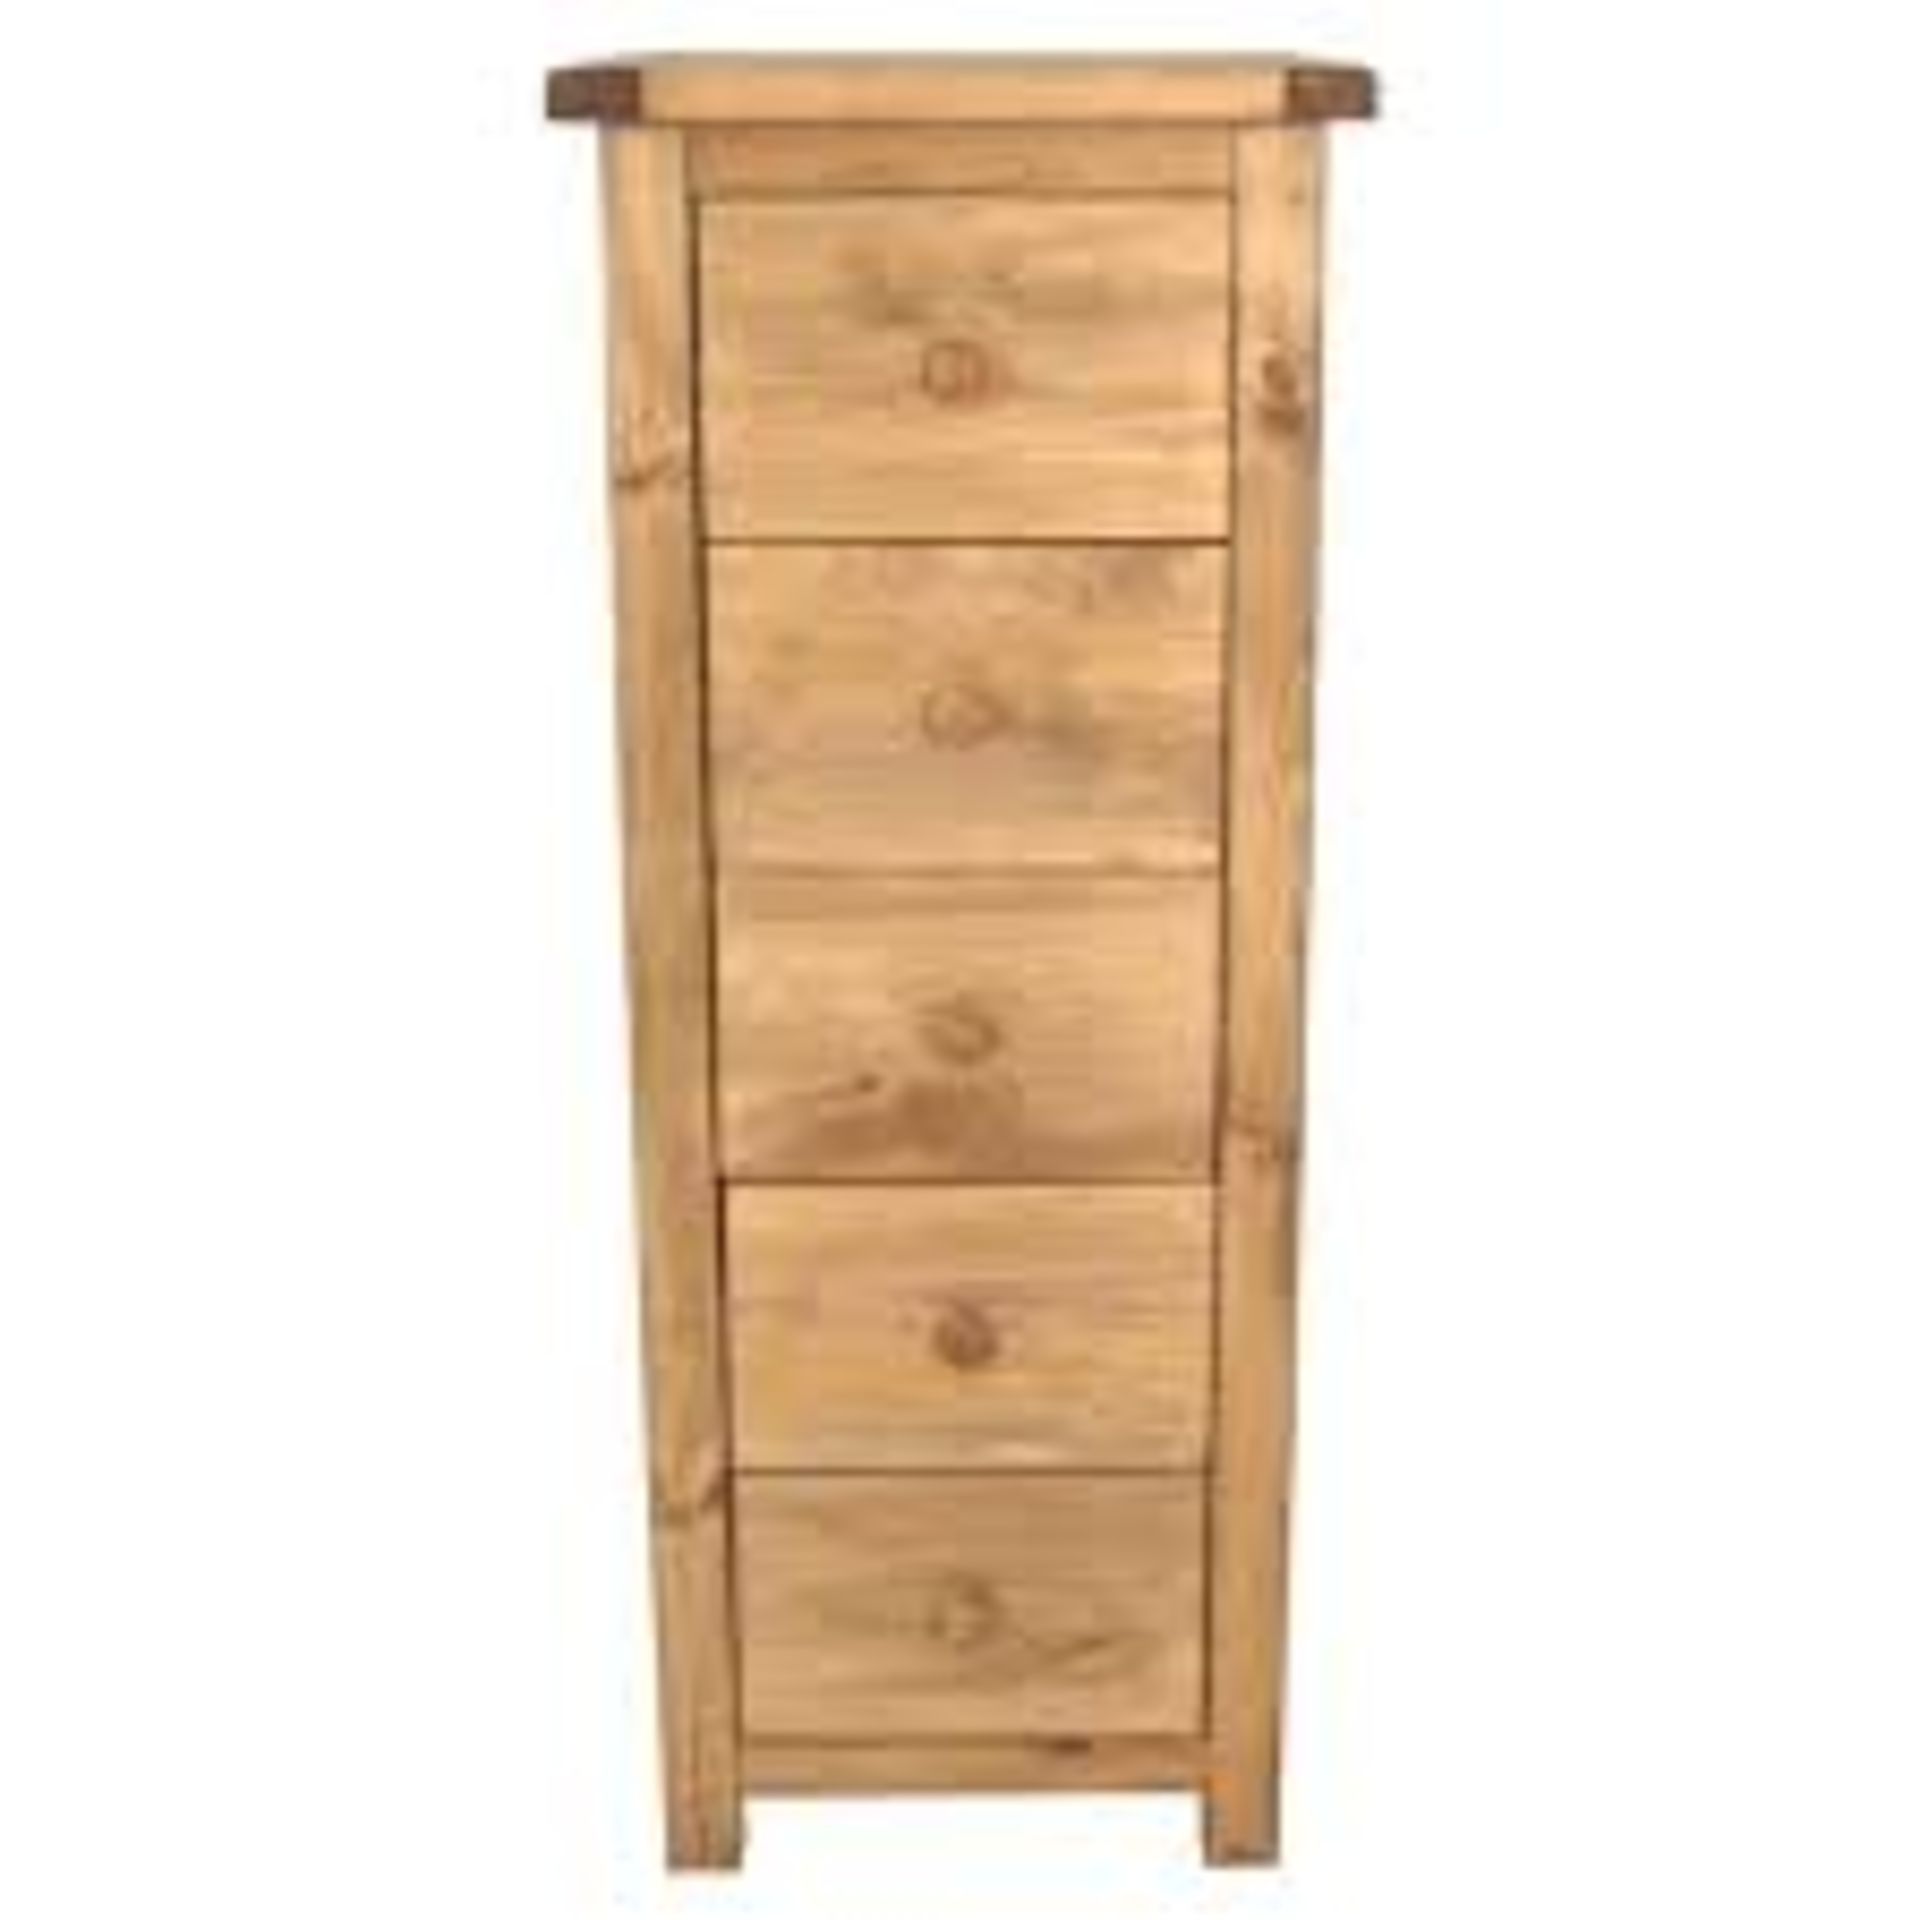 Boxed 5 Drawer Antique Wax Narrow Tall Chest Drawers RRP £160 (17905) (PICTURES ARE FOR ILLUSTRATION